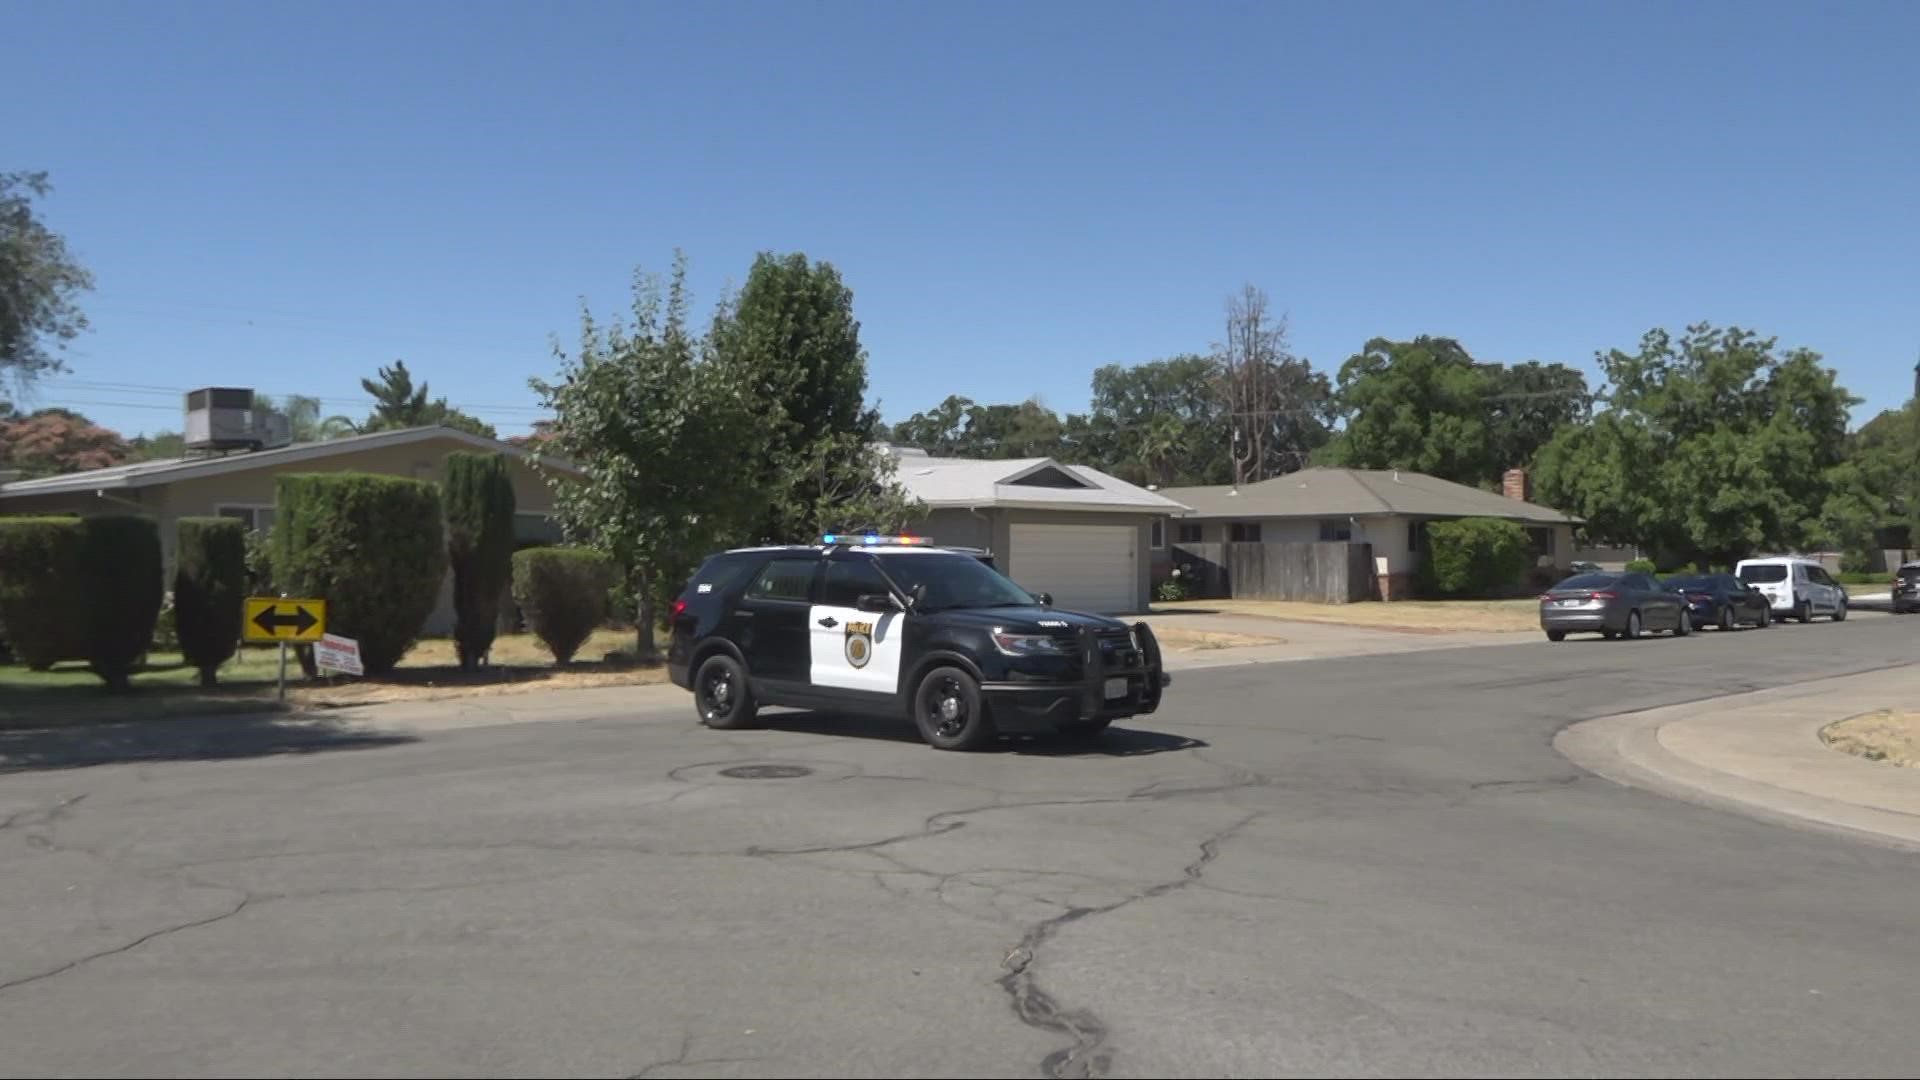 Neither the assault victim nor any police officers were injured in the deadly officer-involved shooting on Gilgunn Way, the Sacramento Police Department says.